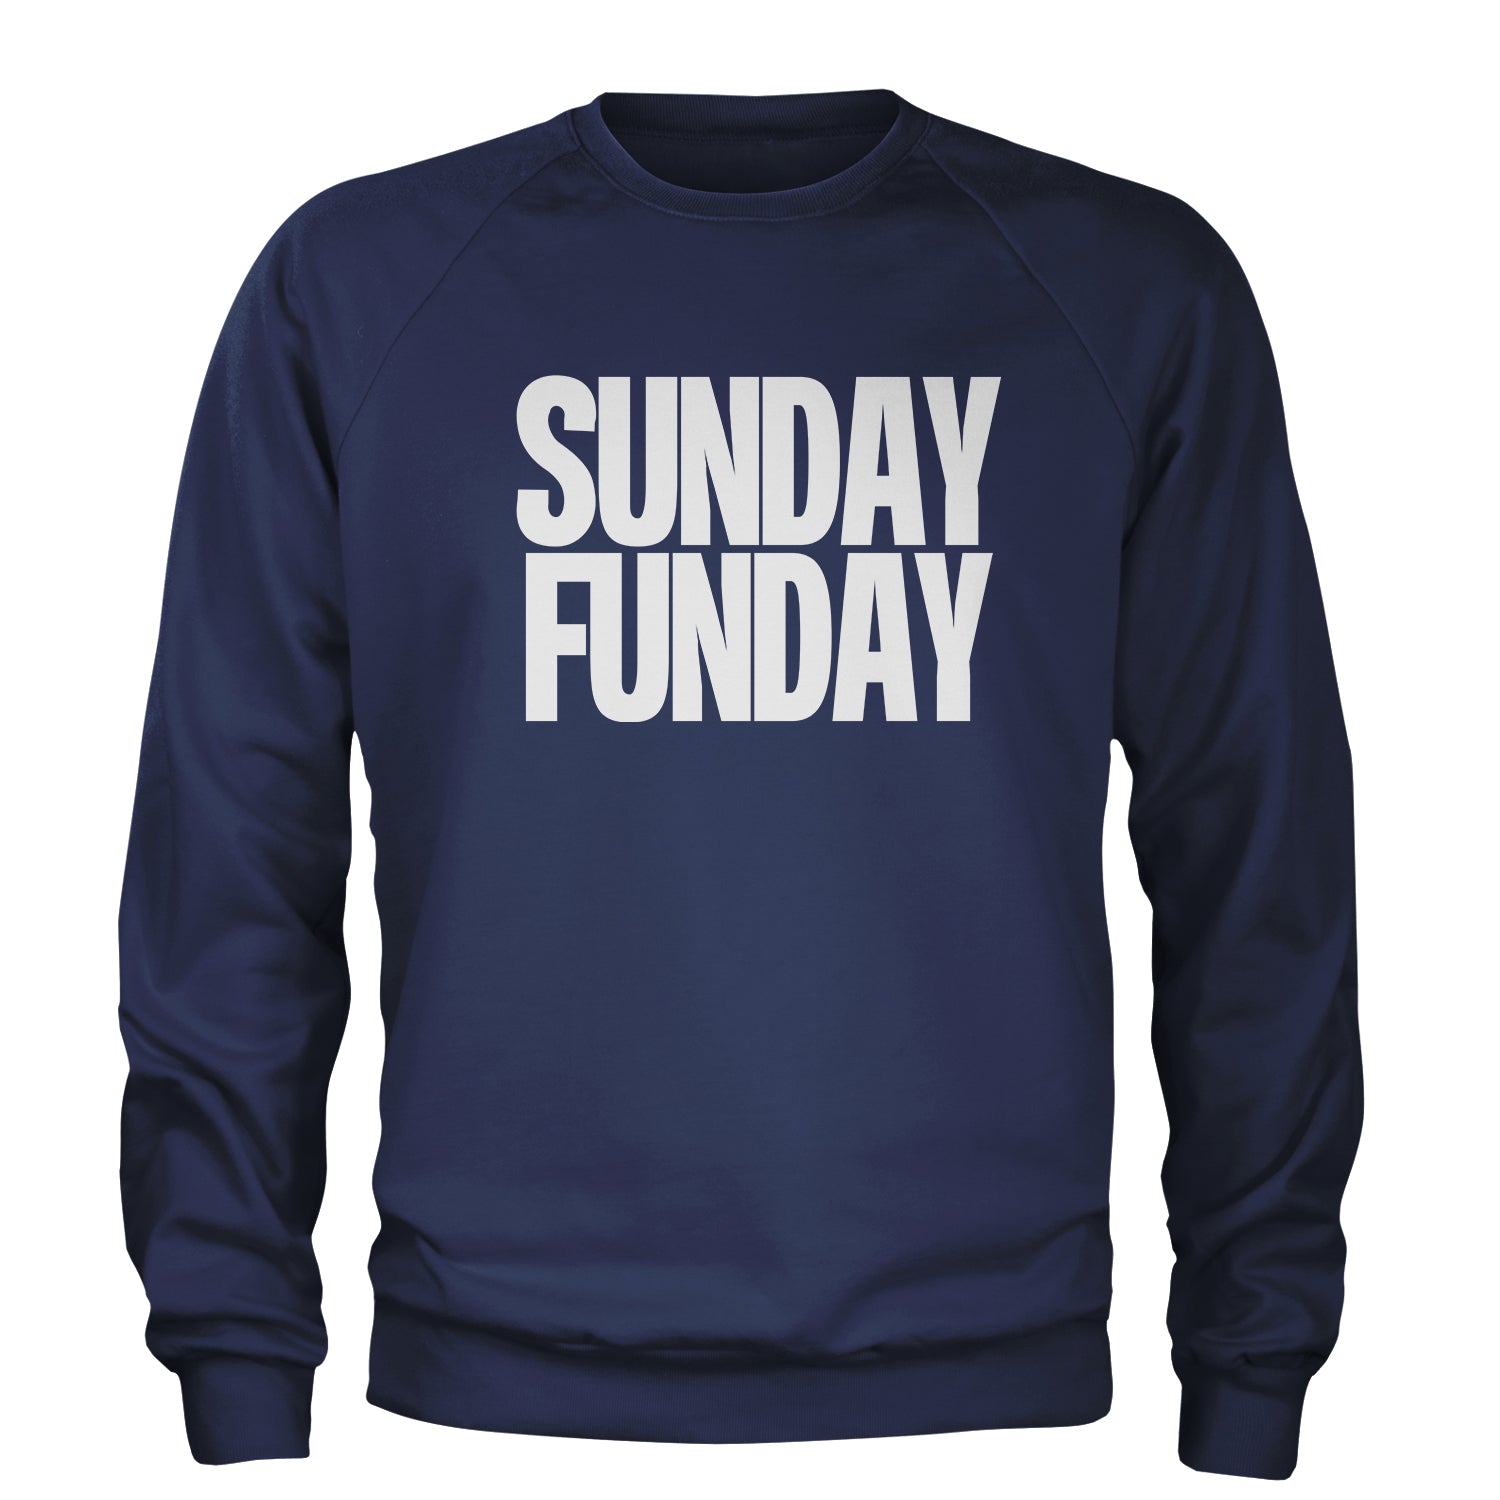 Sunday Funday Adult Crewneck Sweatshirt day, drinking, fun, funday, partying, sun, Sunday by Expression Tees